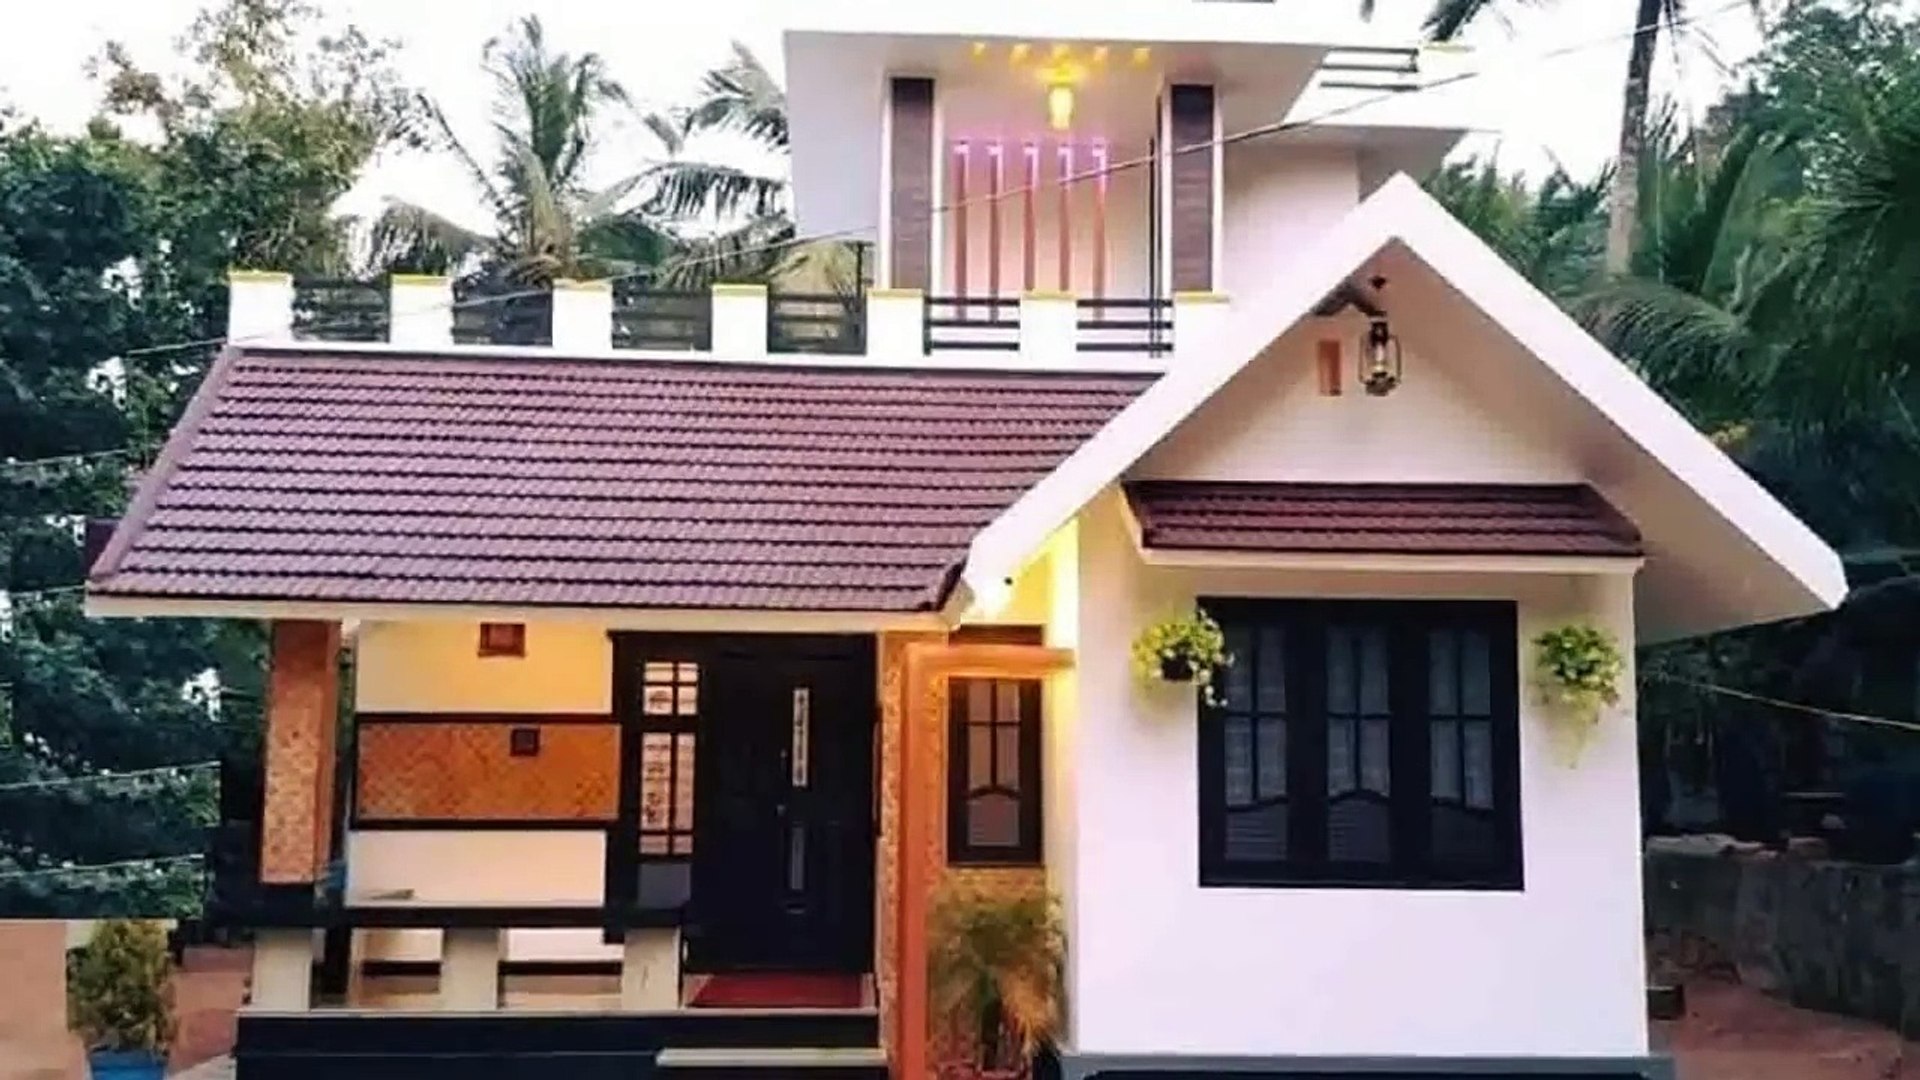 5 Lakhs House Plans In India